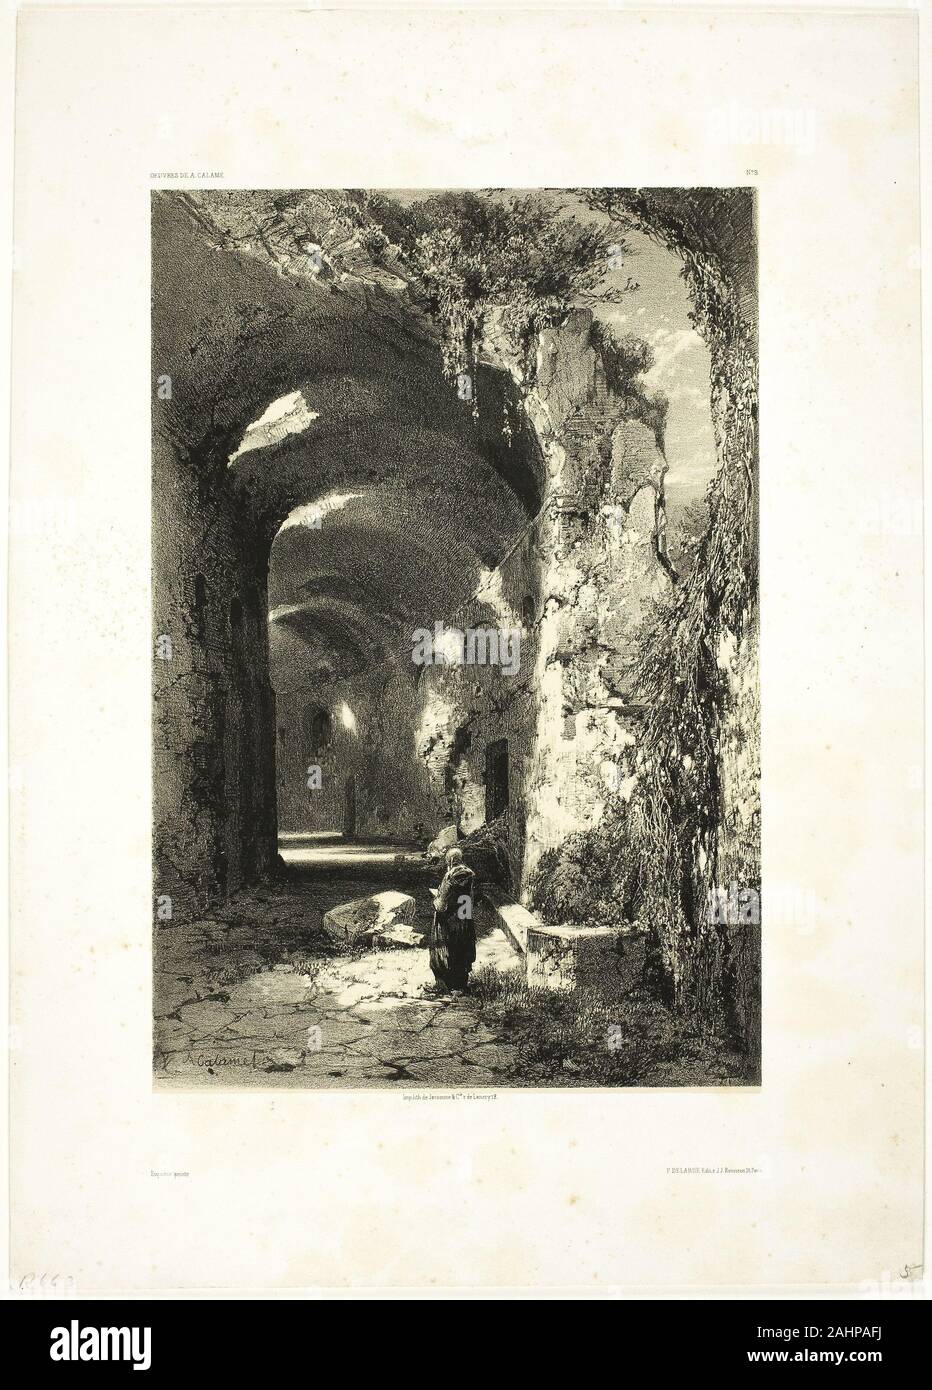 Alexandre Calame. Ruin of an Amphitheatre at Pouzzoles (Kingdom of Naples),  plate 9 from Oeuvres de A. Calame. 1851. Switzerland. Lithograph on buff  chine collé, laid down on off-white wove paper Ruin